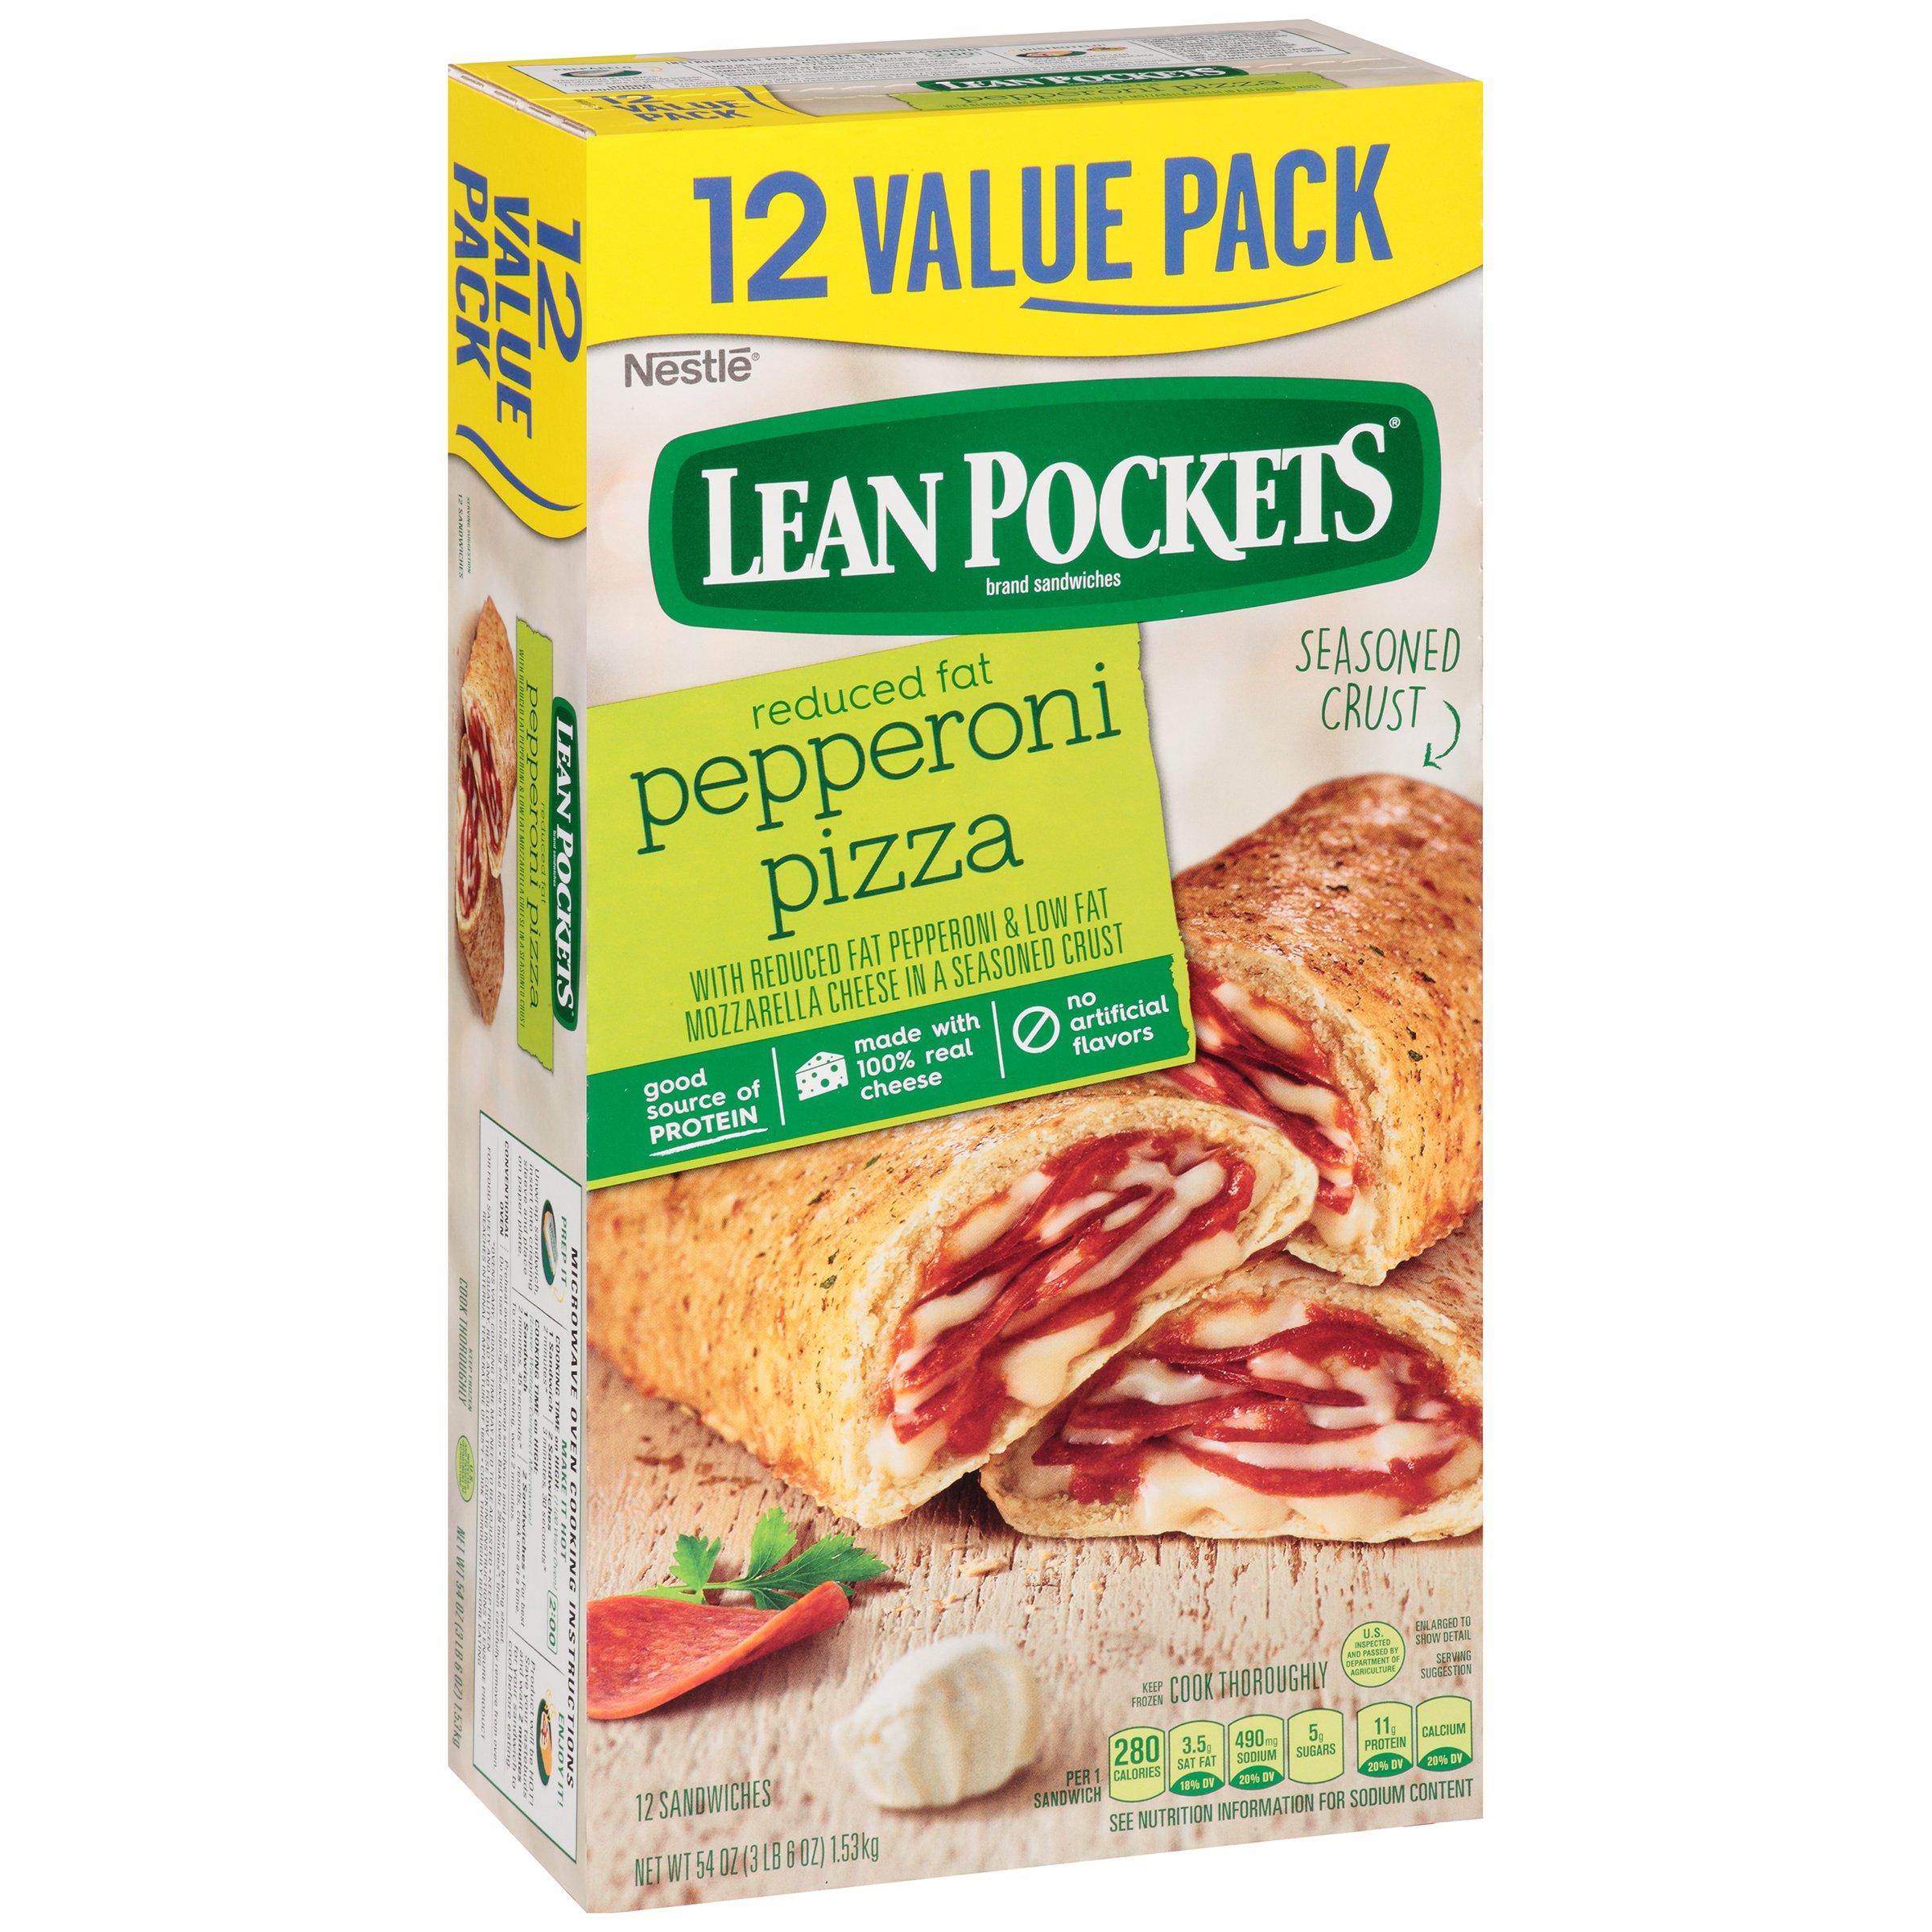 Hot Pockets Pepperoni Pizza with Garlic Buttery Seasoned Crust - 2 ct